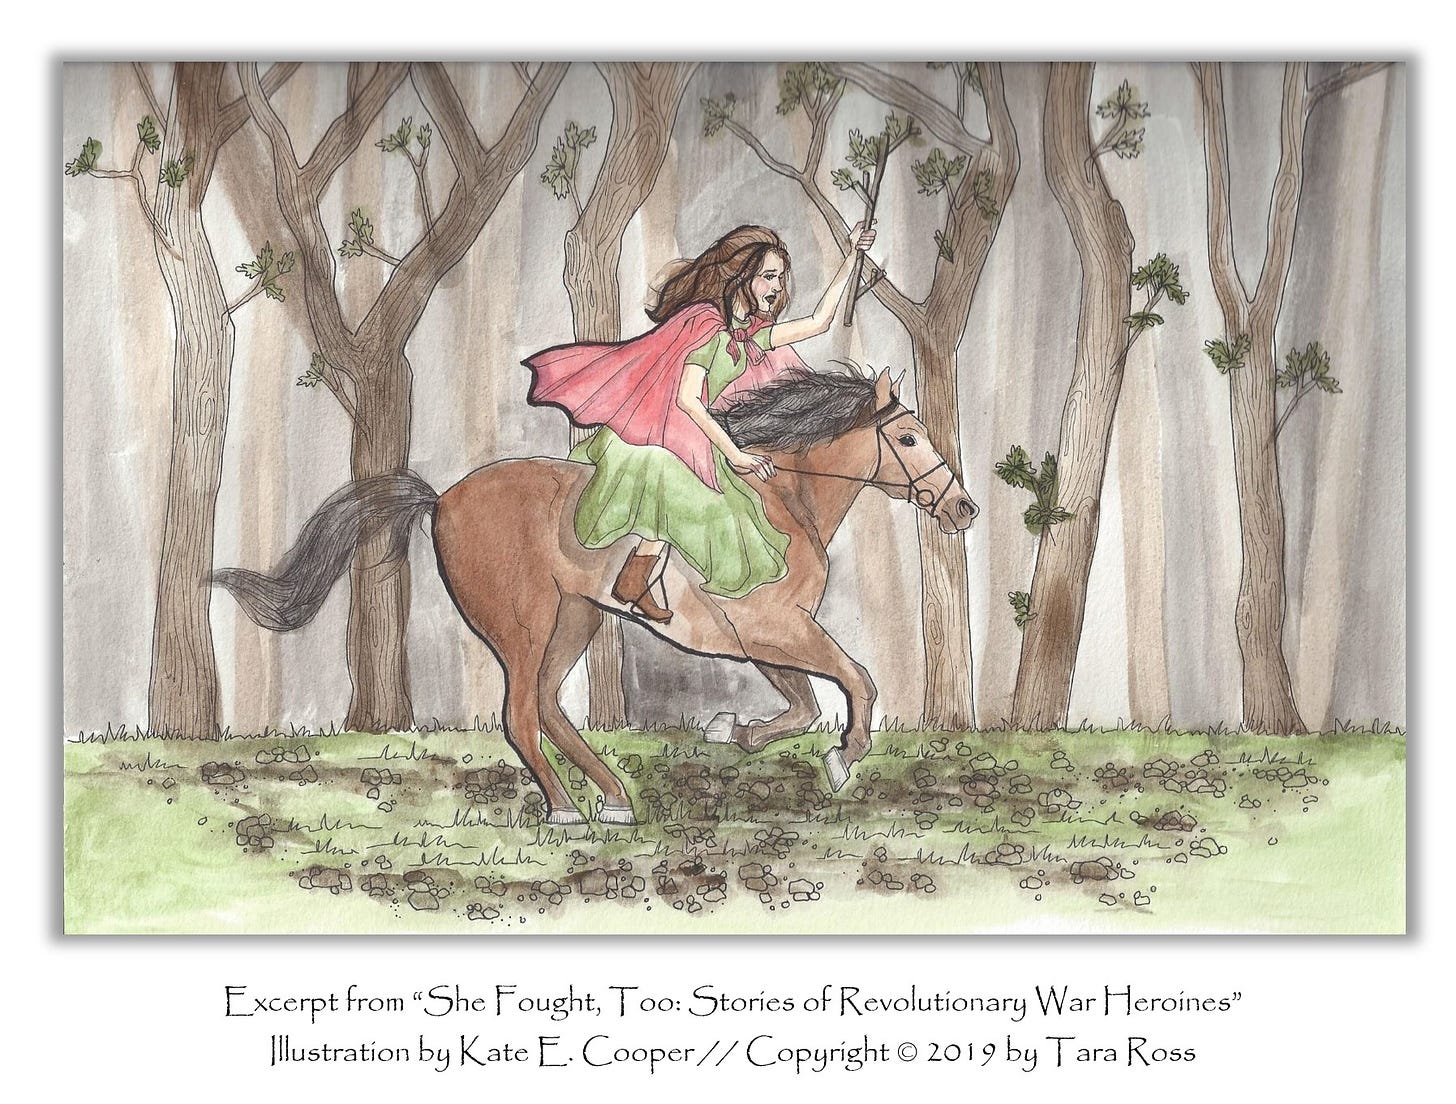 Excerpt from “She Fought, Too: Stories of Revolutionary War Heroines” Illustration by Kate E. Cooper // Copyright © 2019 by Tara Ross.  The illustration depicts a young girl riding a horse through dense woods. She wears a pink cape, a green dress, and riding boots.  It looks dark, and she is in a hurry!